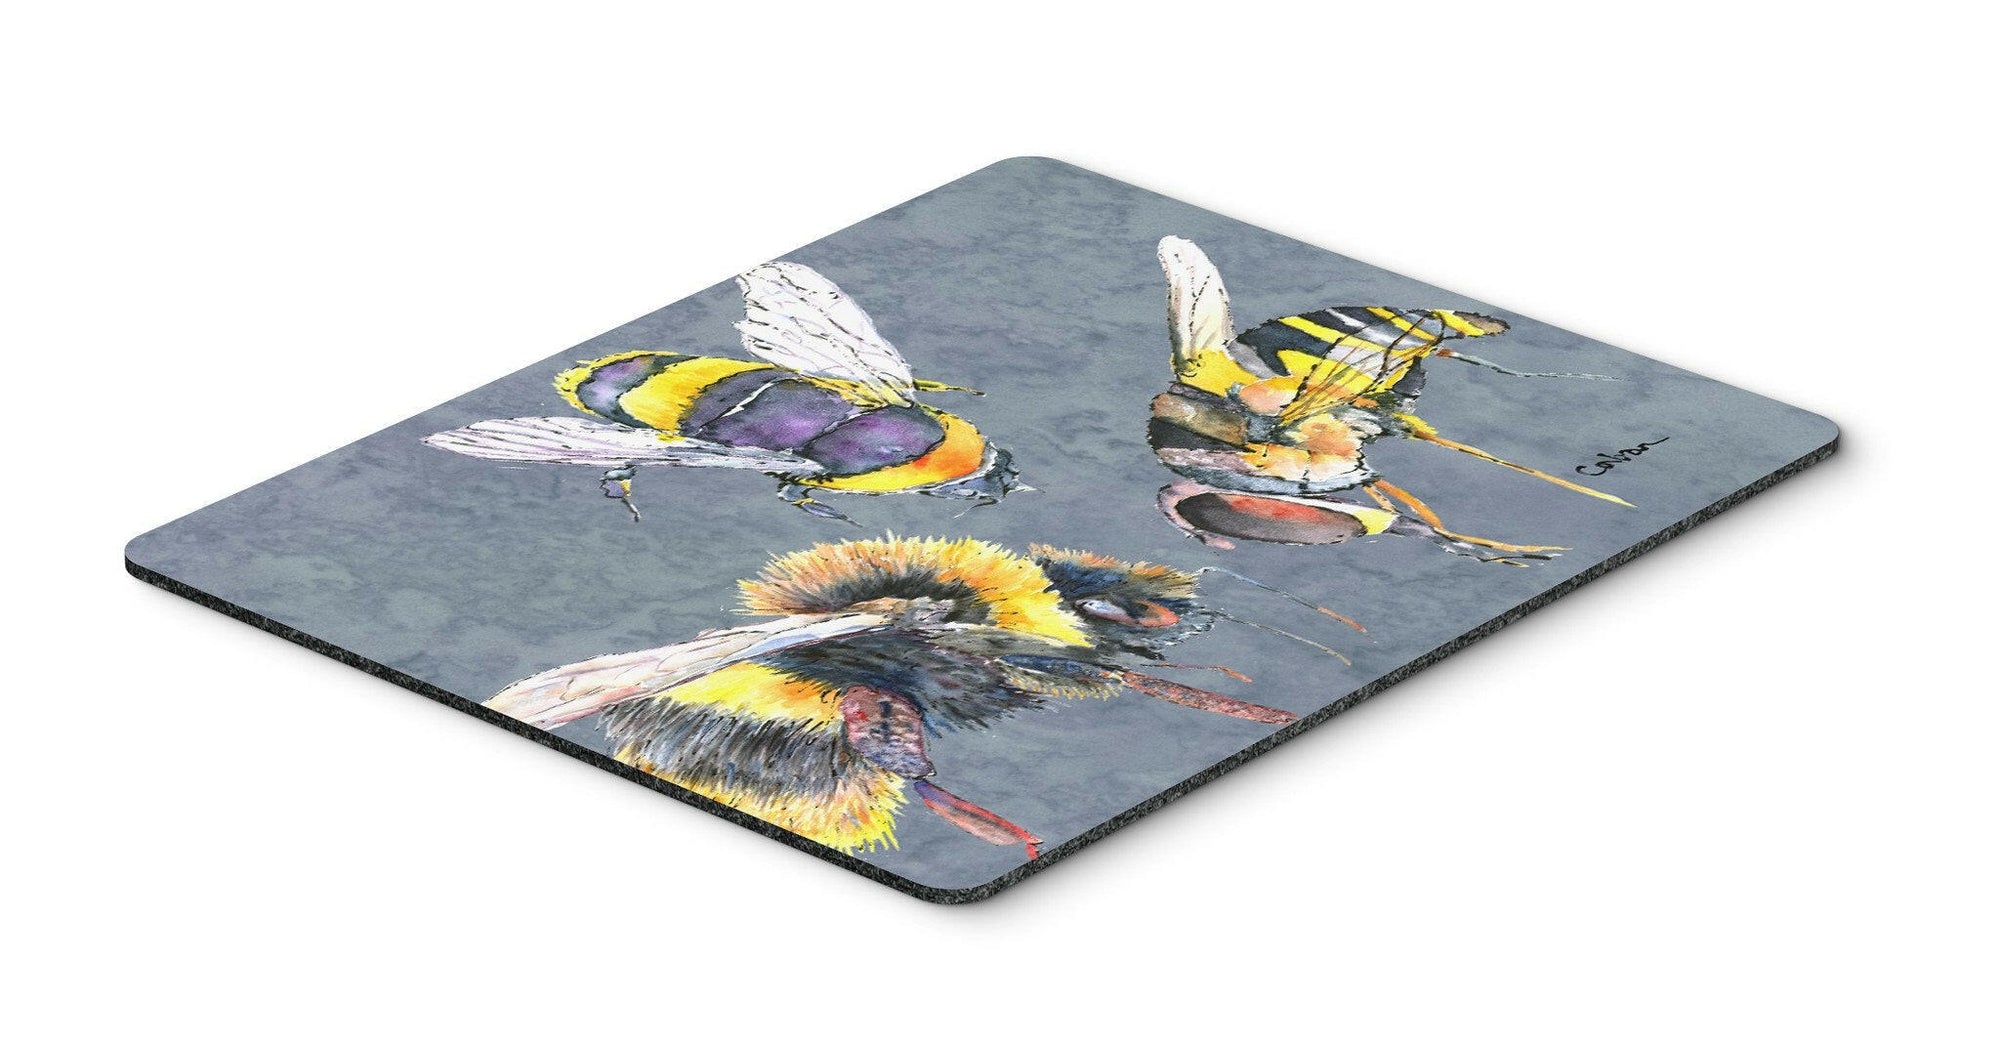 Bee Bees Times Three Mouse Pad, Hot Pad or Trivet by Caroline's Treasures